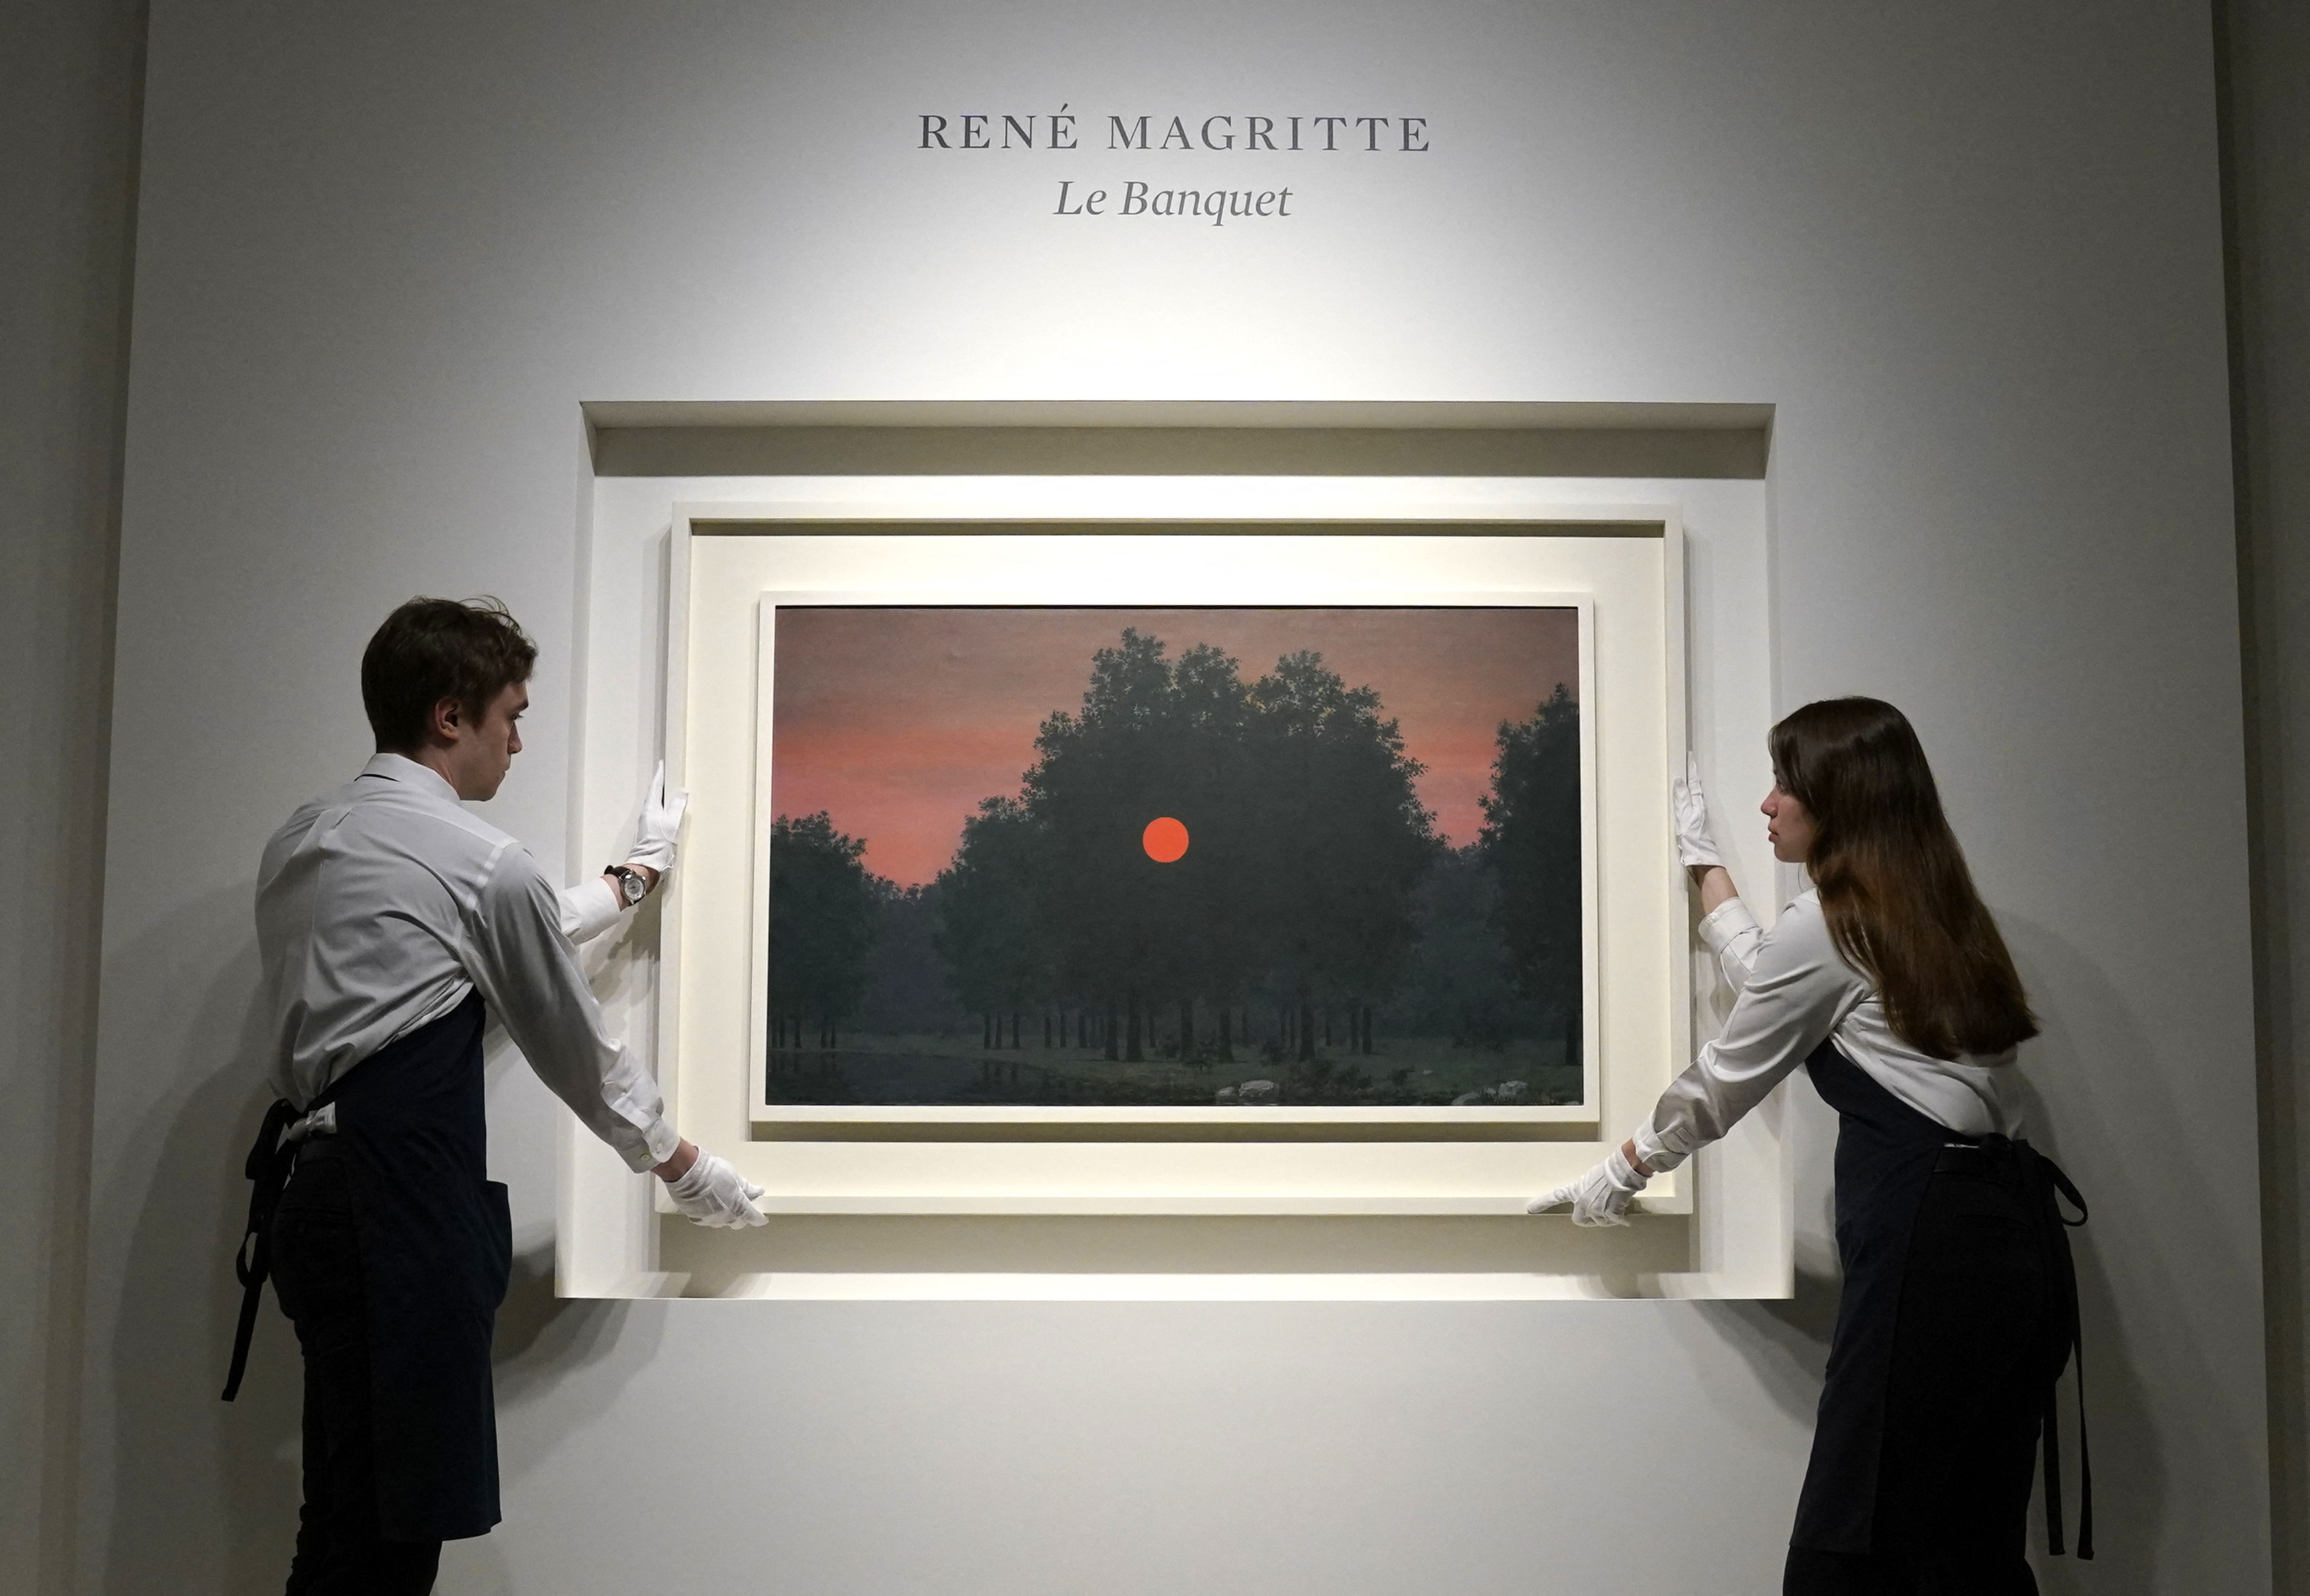 Magritte's Le Banquet auctioned for 16.7m euros in New York